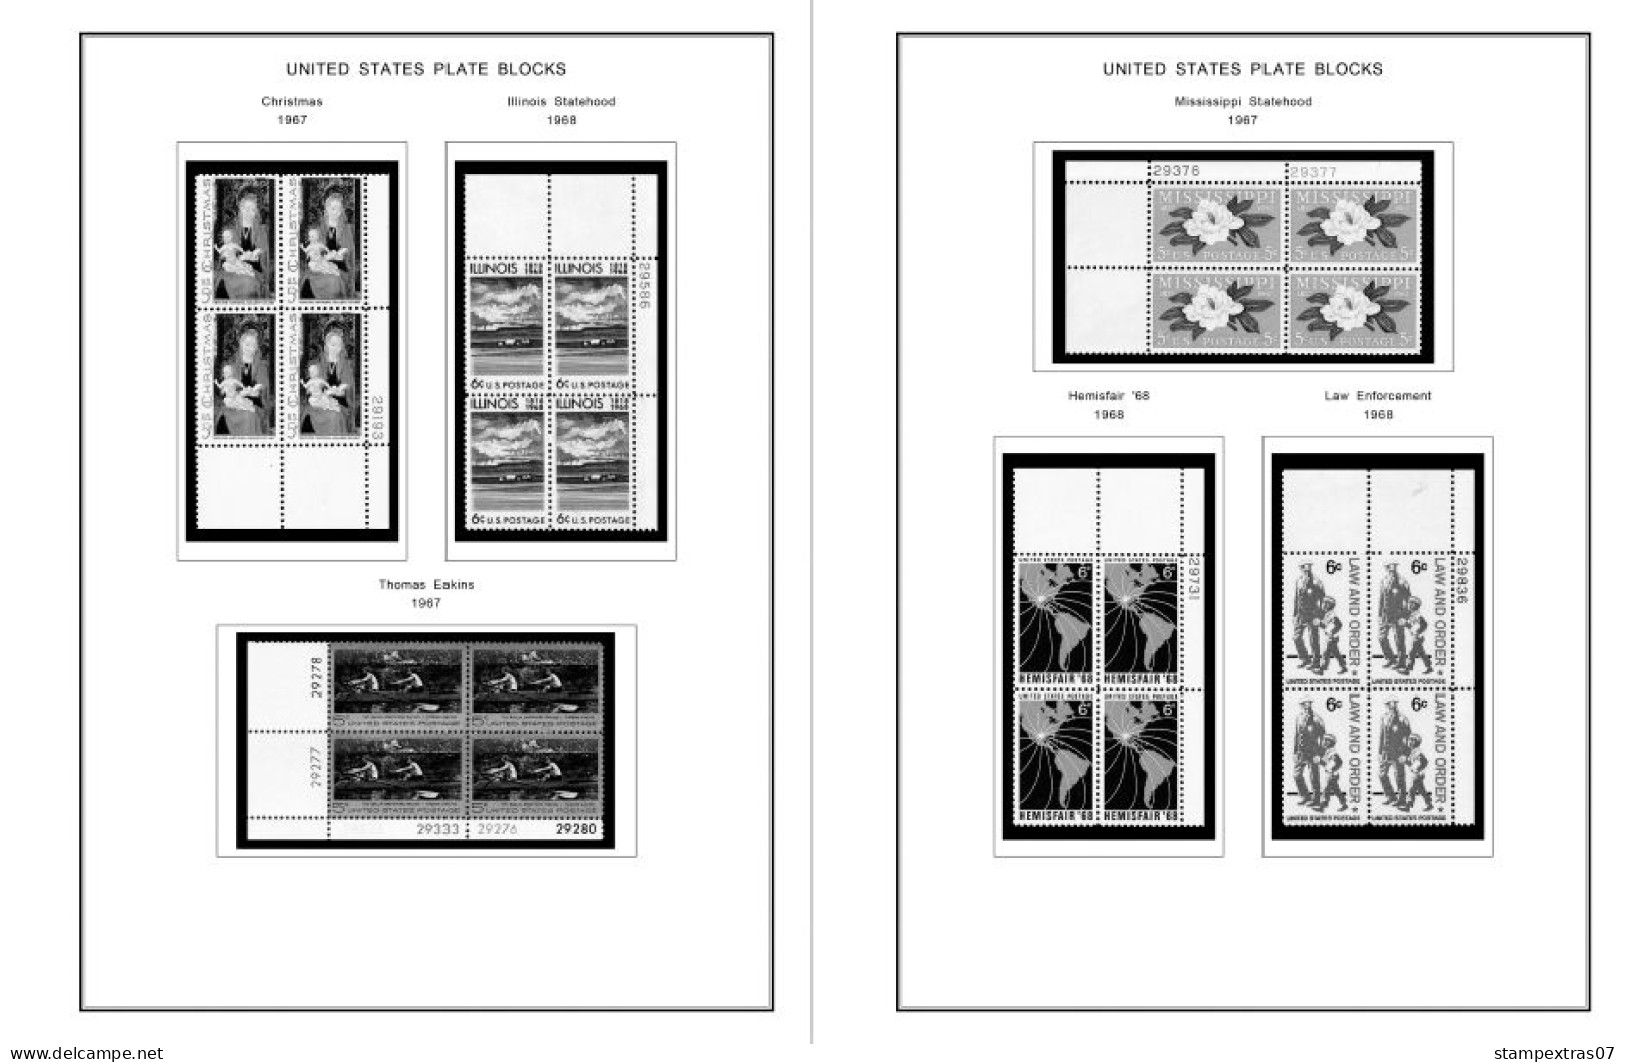 US 1960-1969 PLATE BLOCKS STAMP ALBUM PAGES (68 b&w illustrated pages)